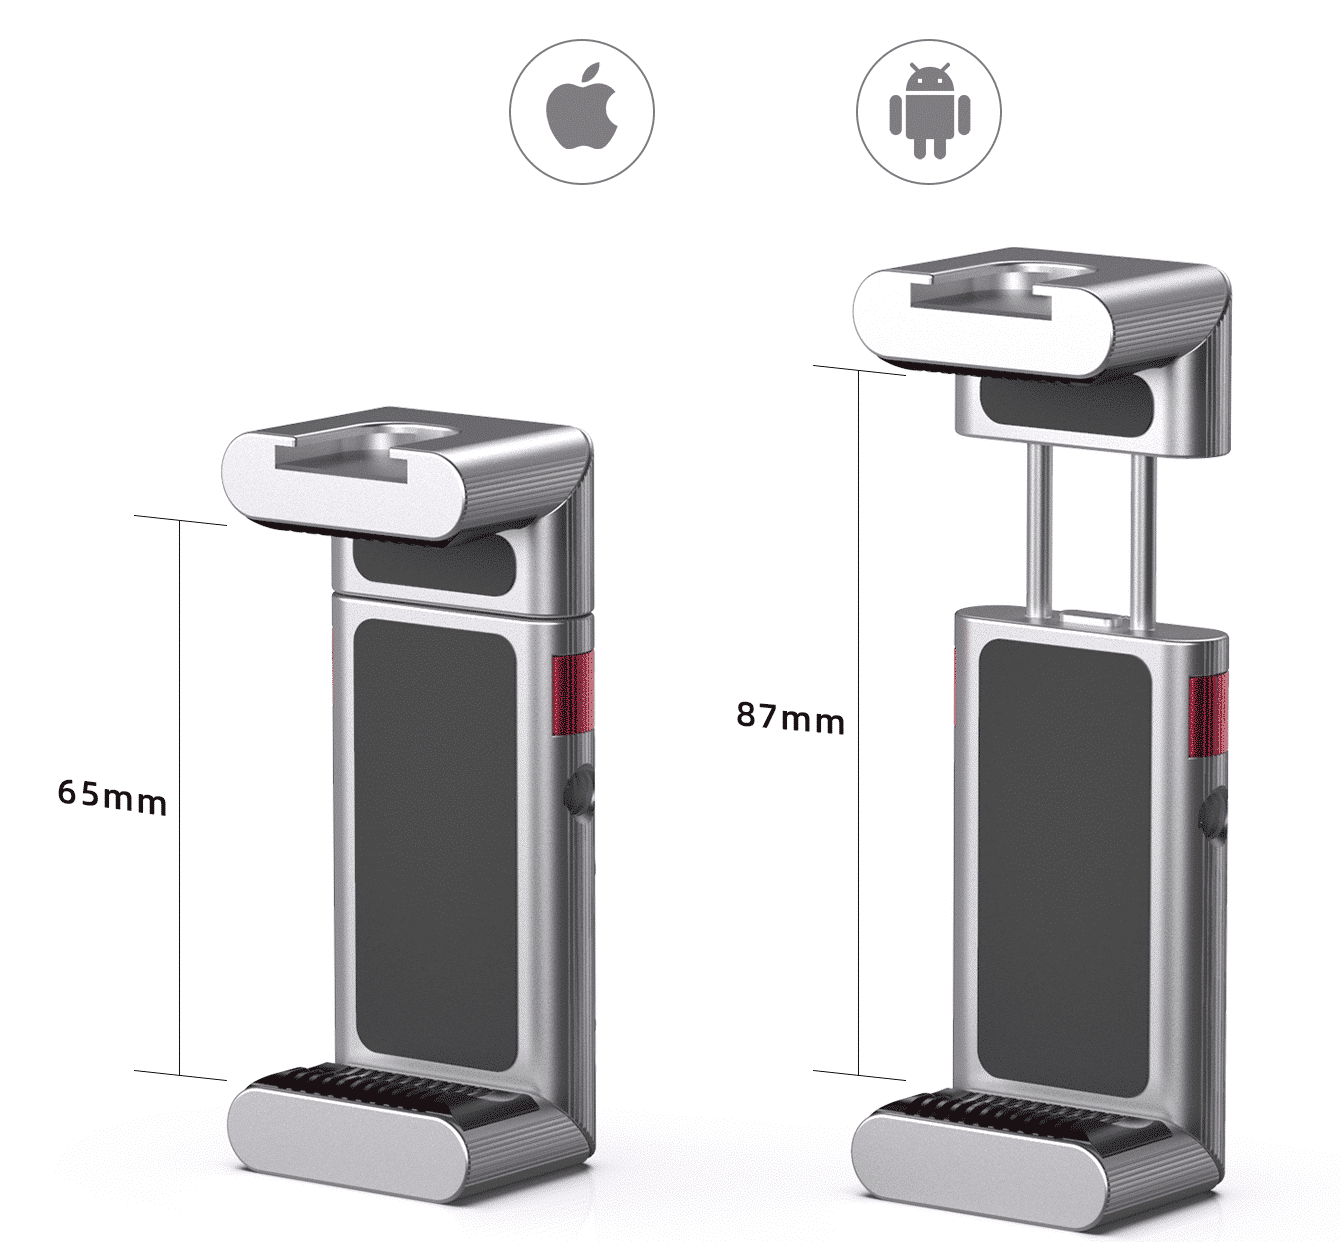 Ulanzi ST-23 foldable phone holder metal with 2 cold shoe mounts